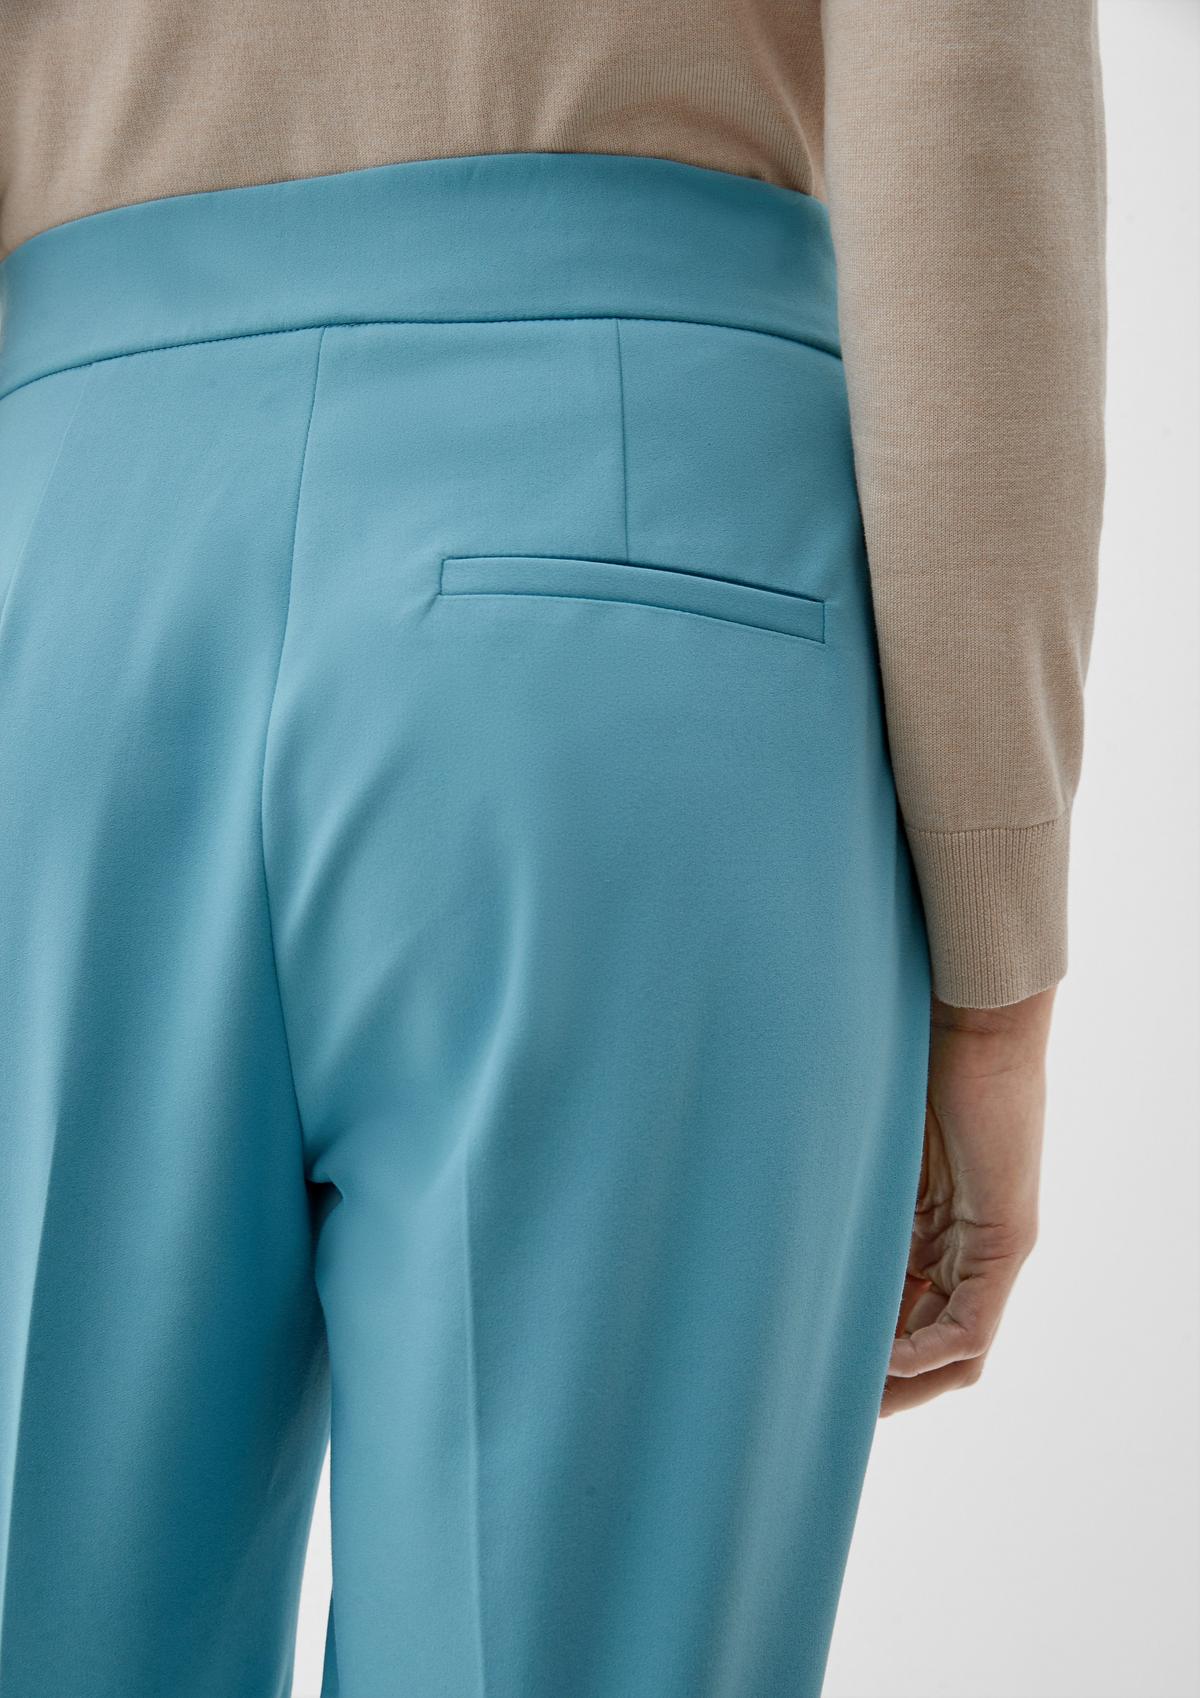 s.Oliver Sue: trousers with a slim leg